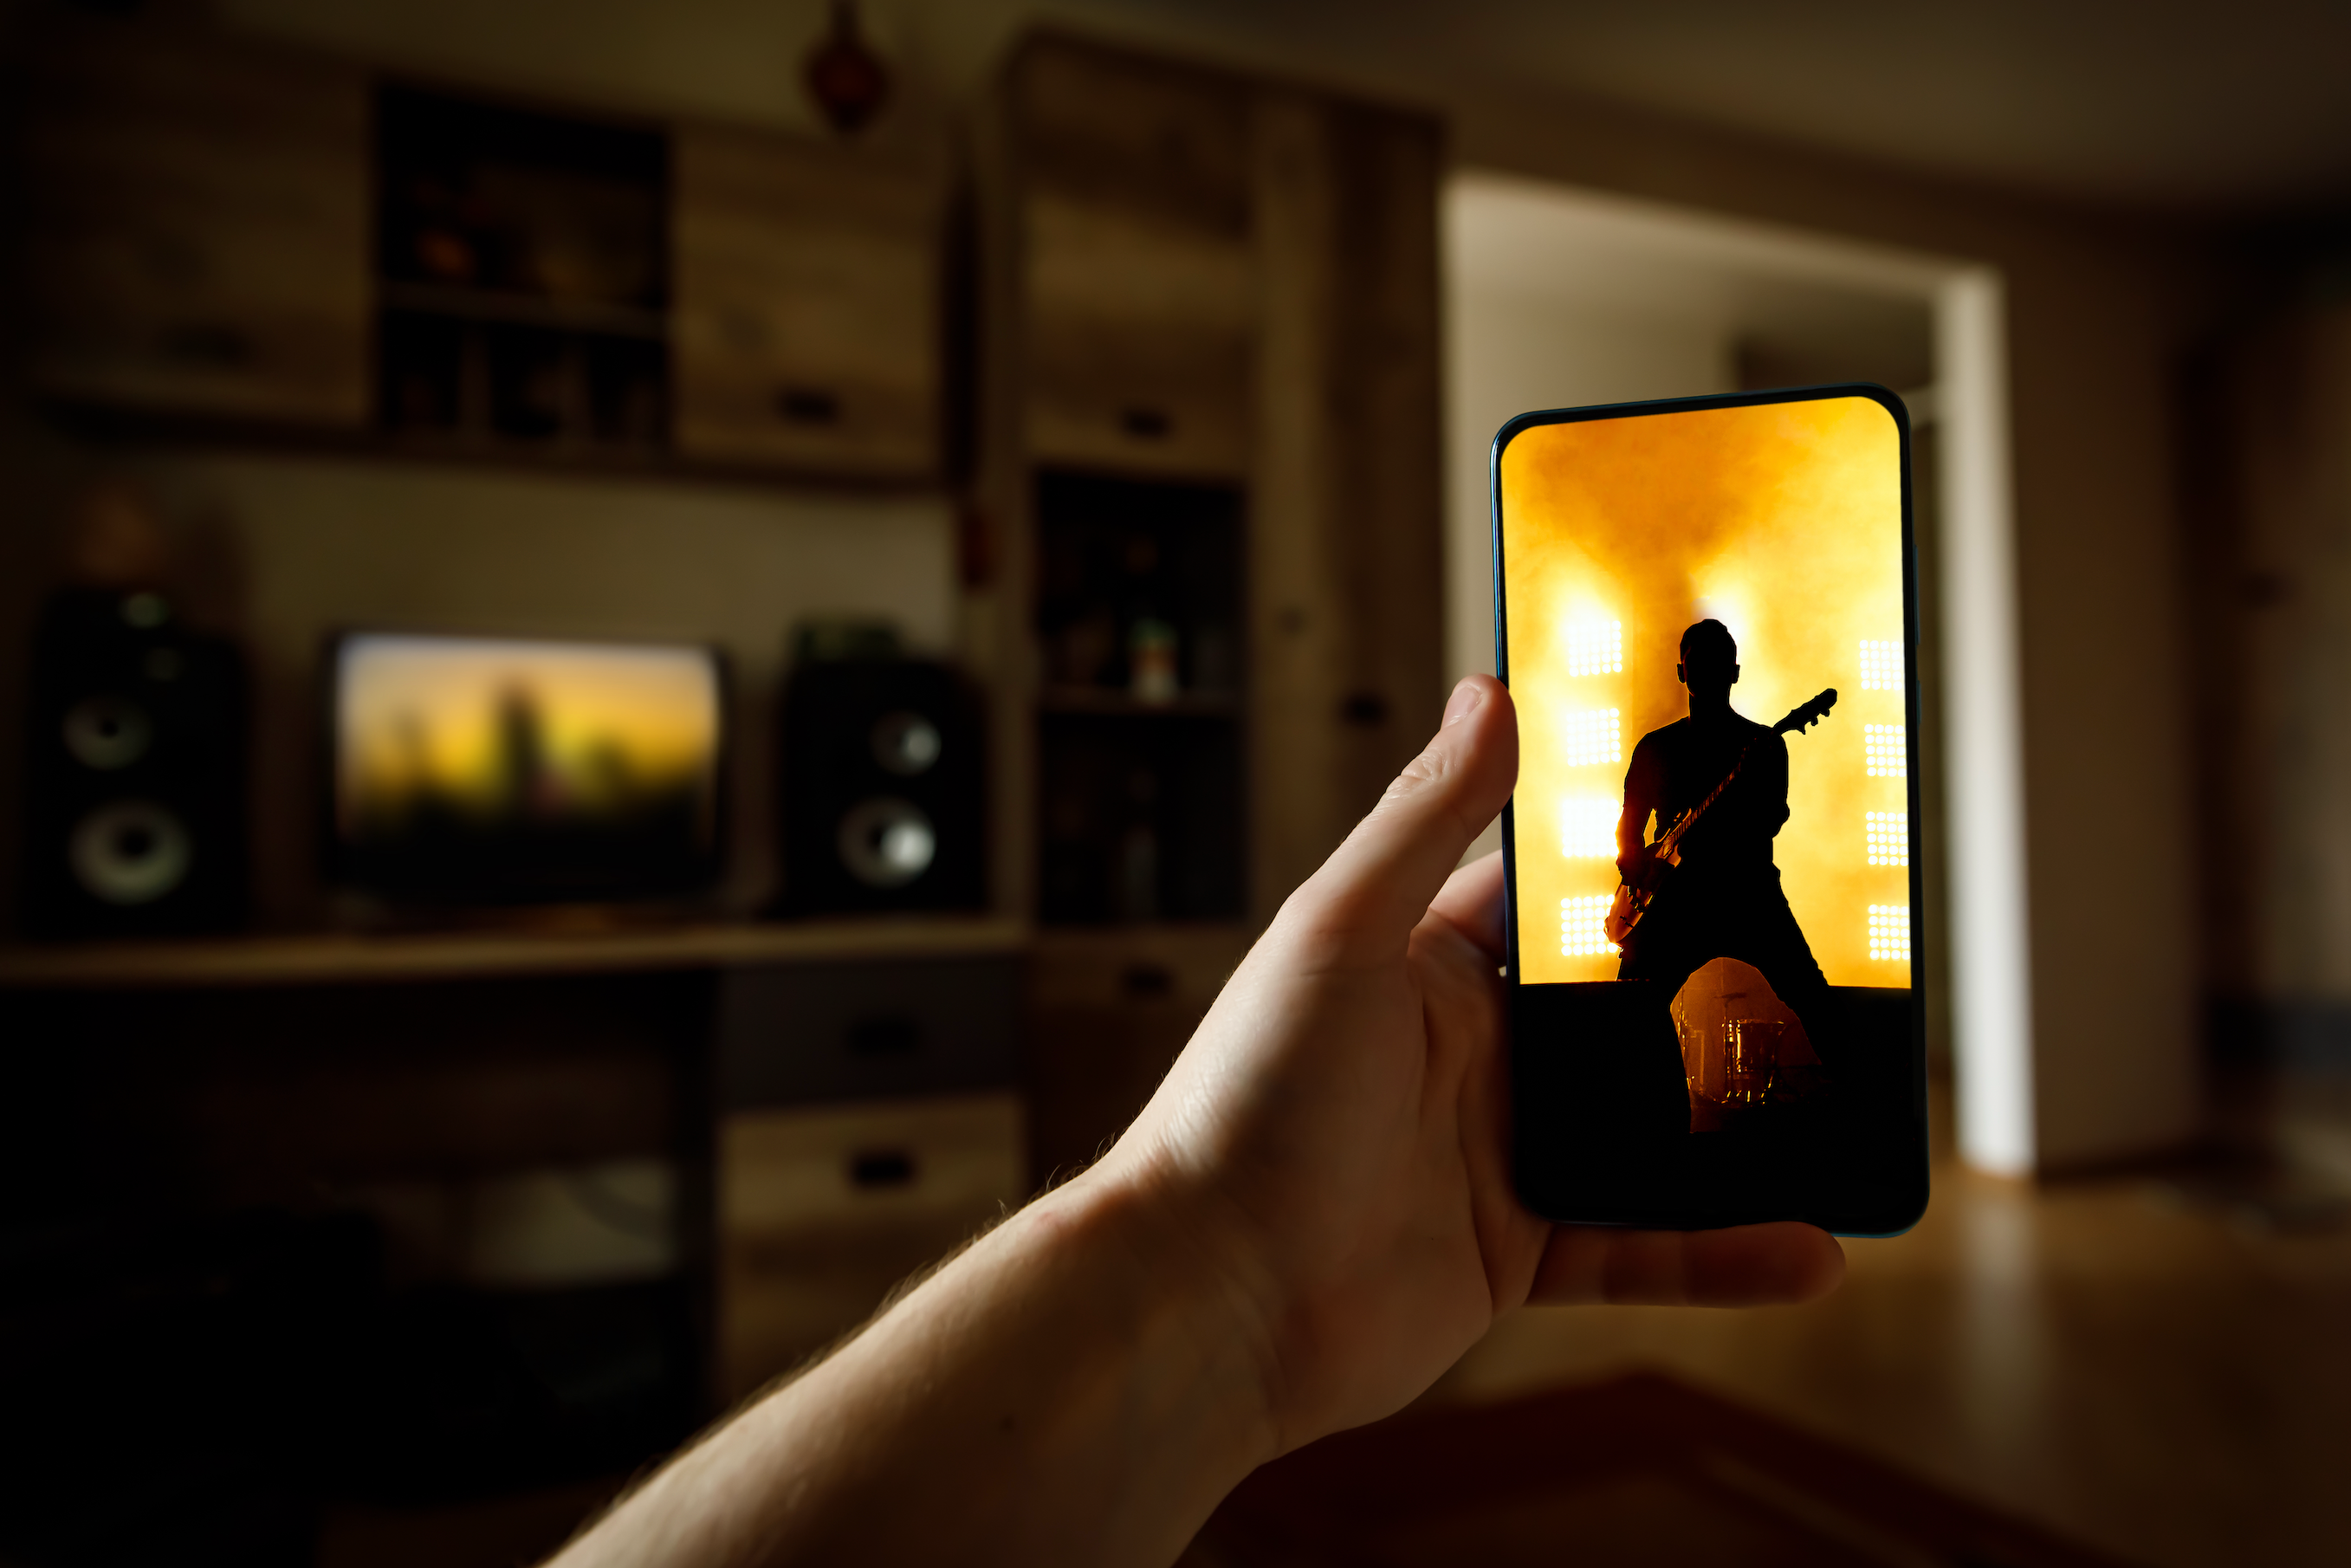 a hand holds a phone streaming live music that matches the same screen on the television in the background